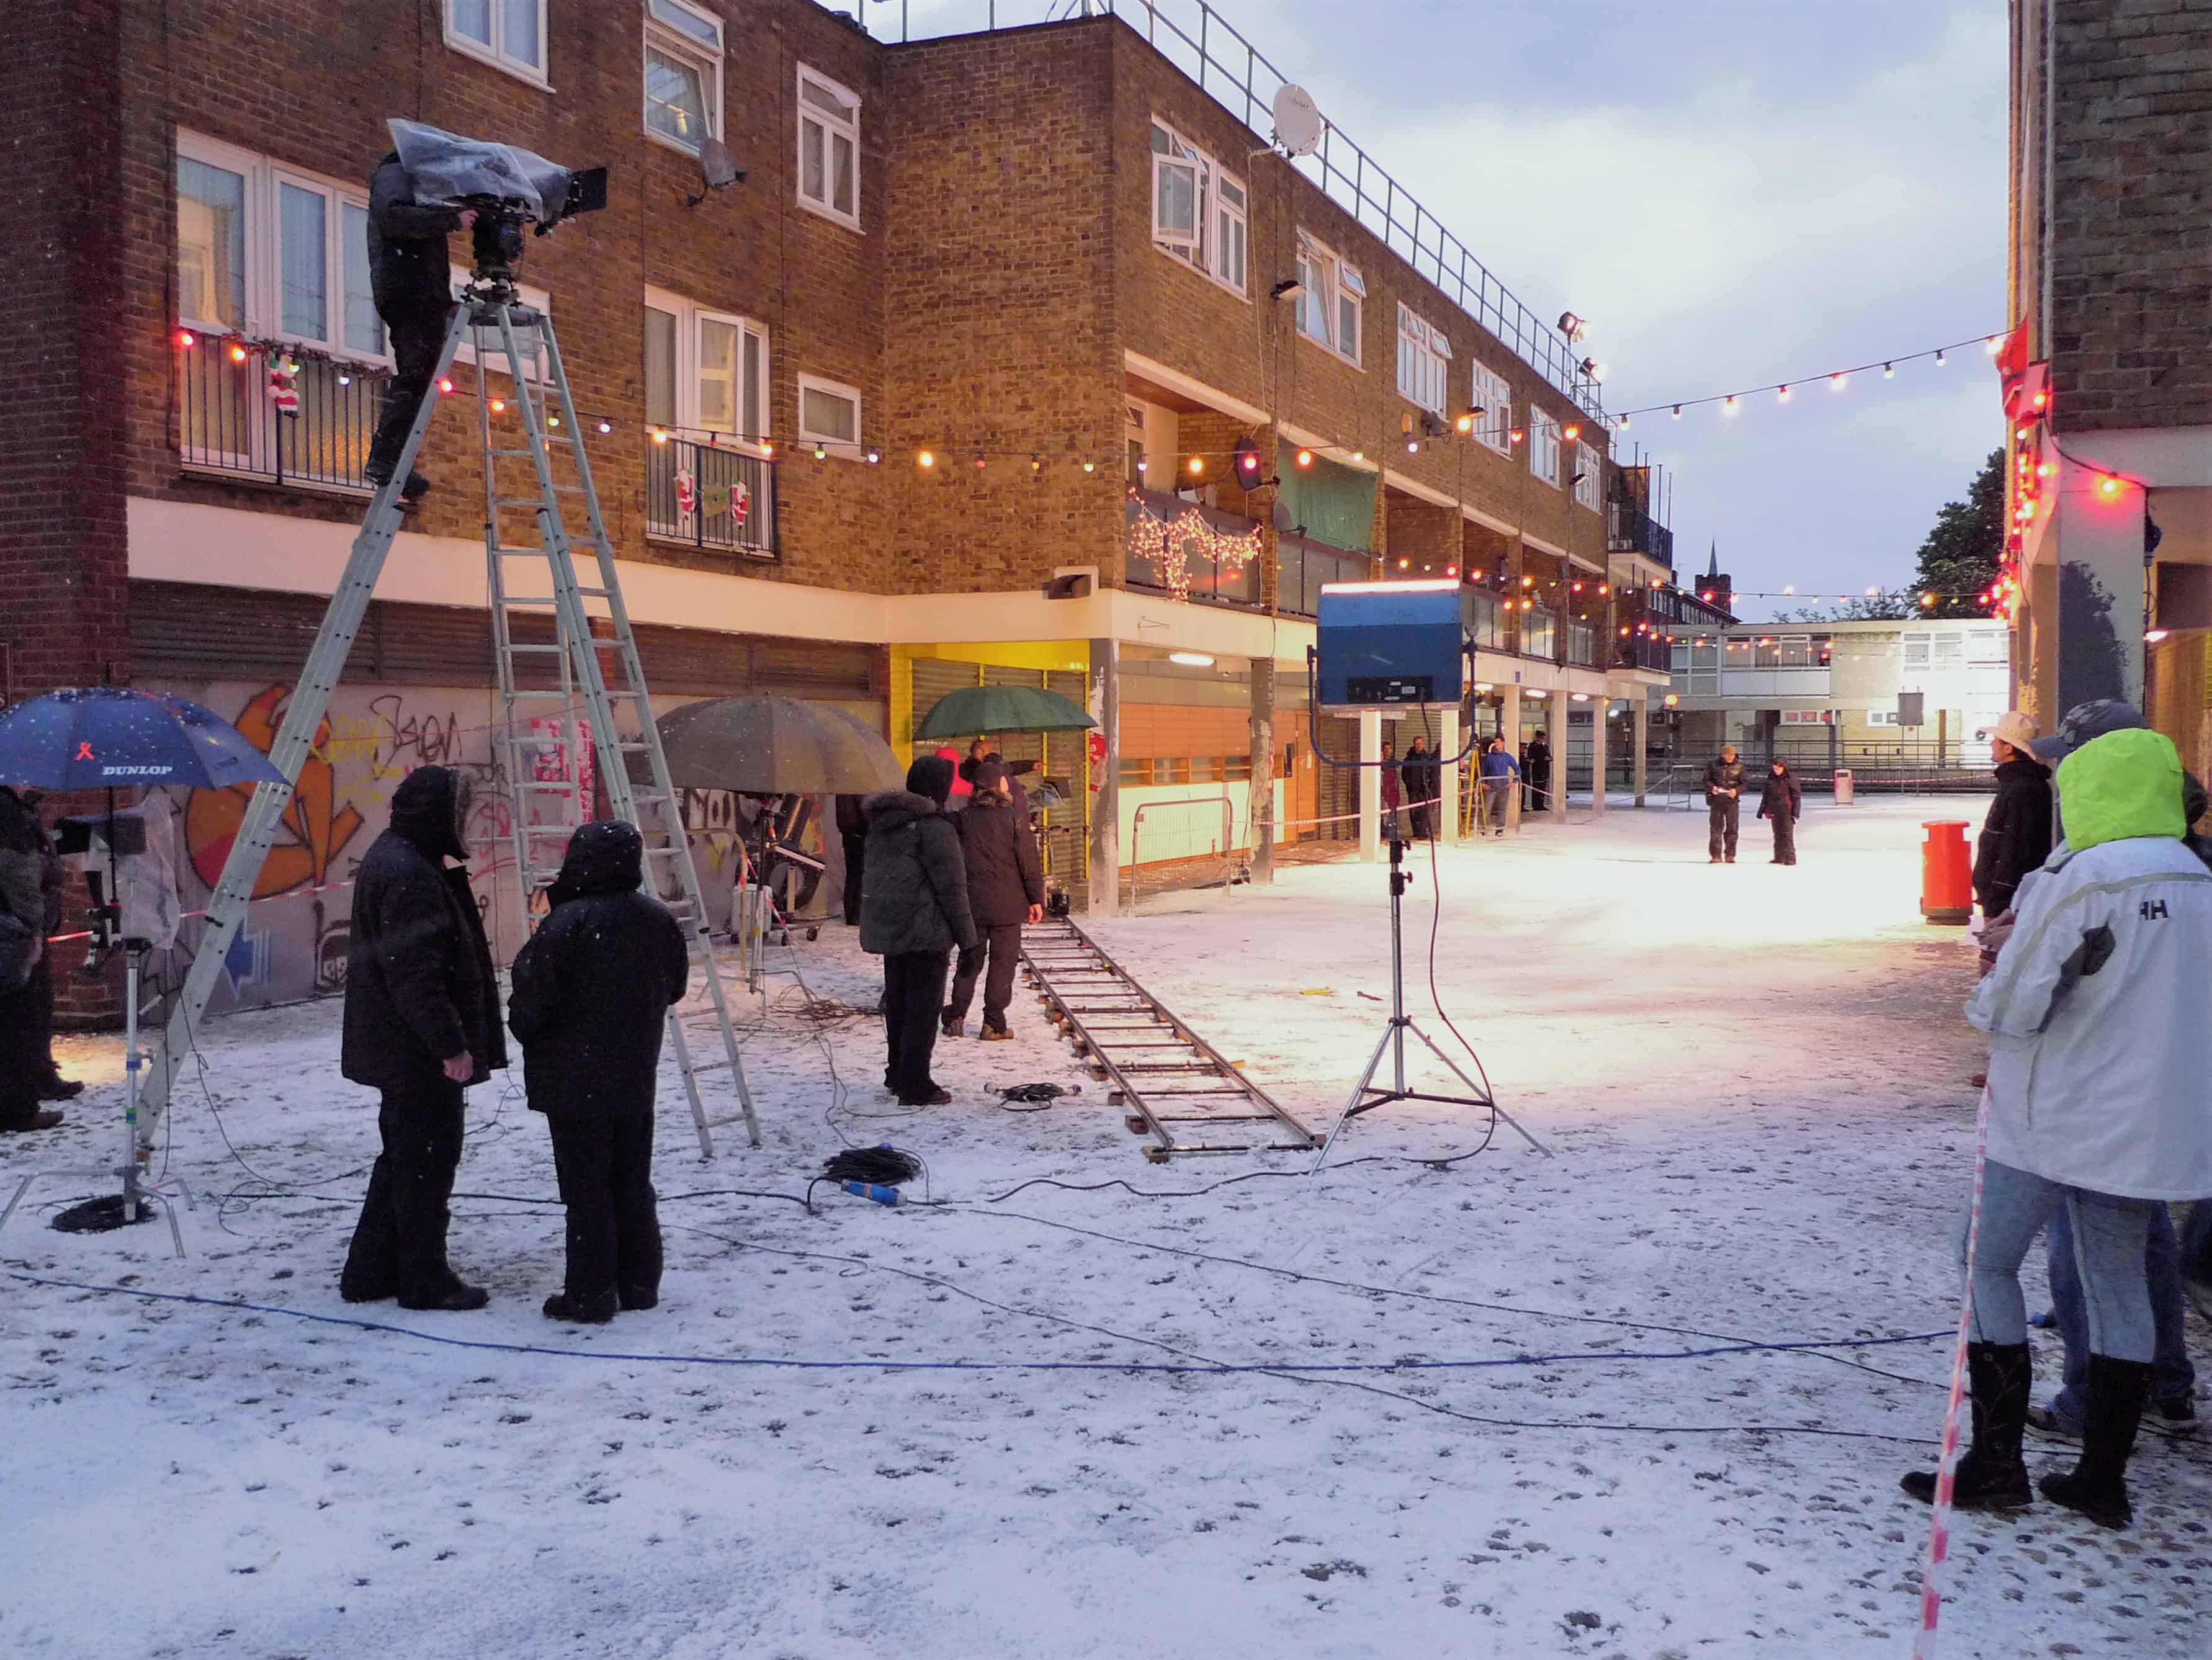 Doctor Who was filmed in Camberwell's Brandon Estate from 2005-2010